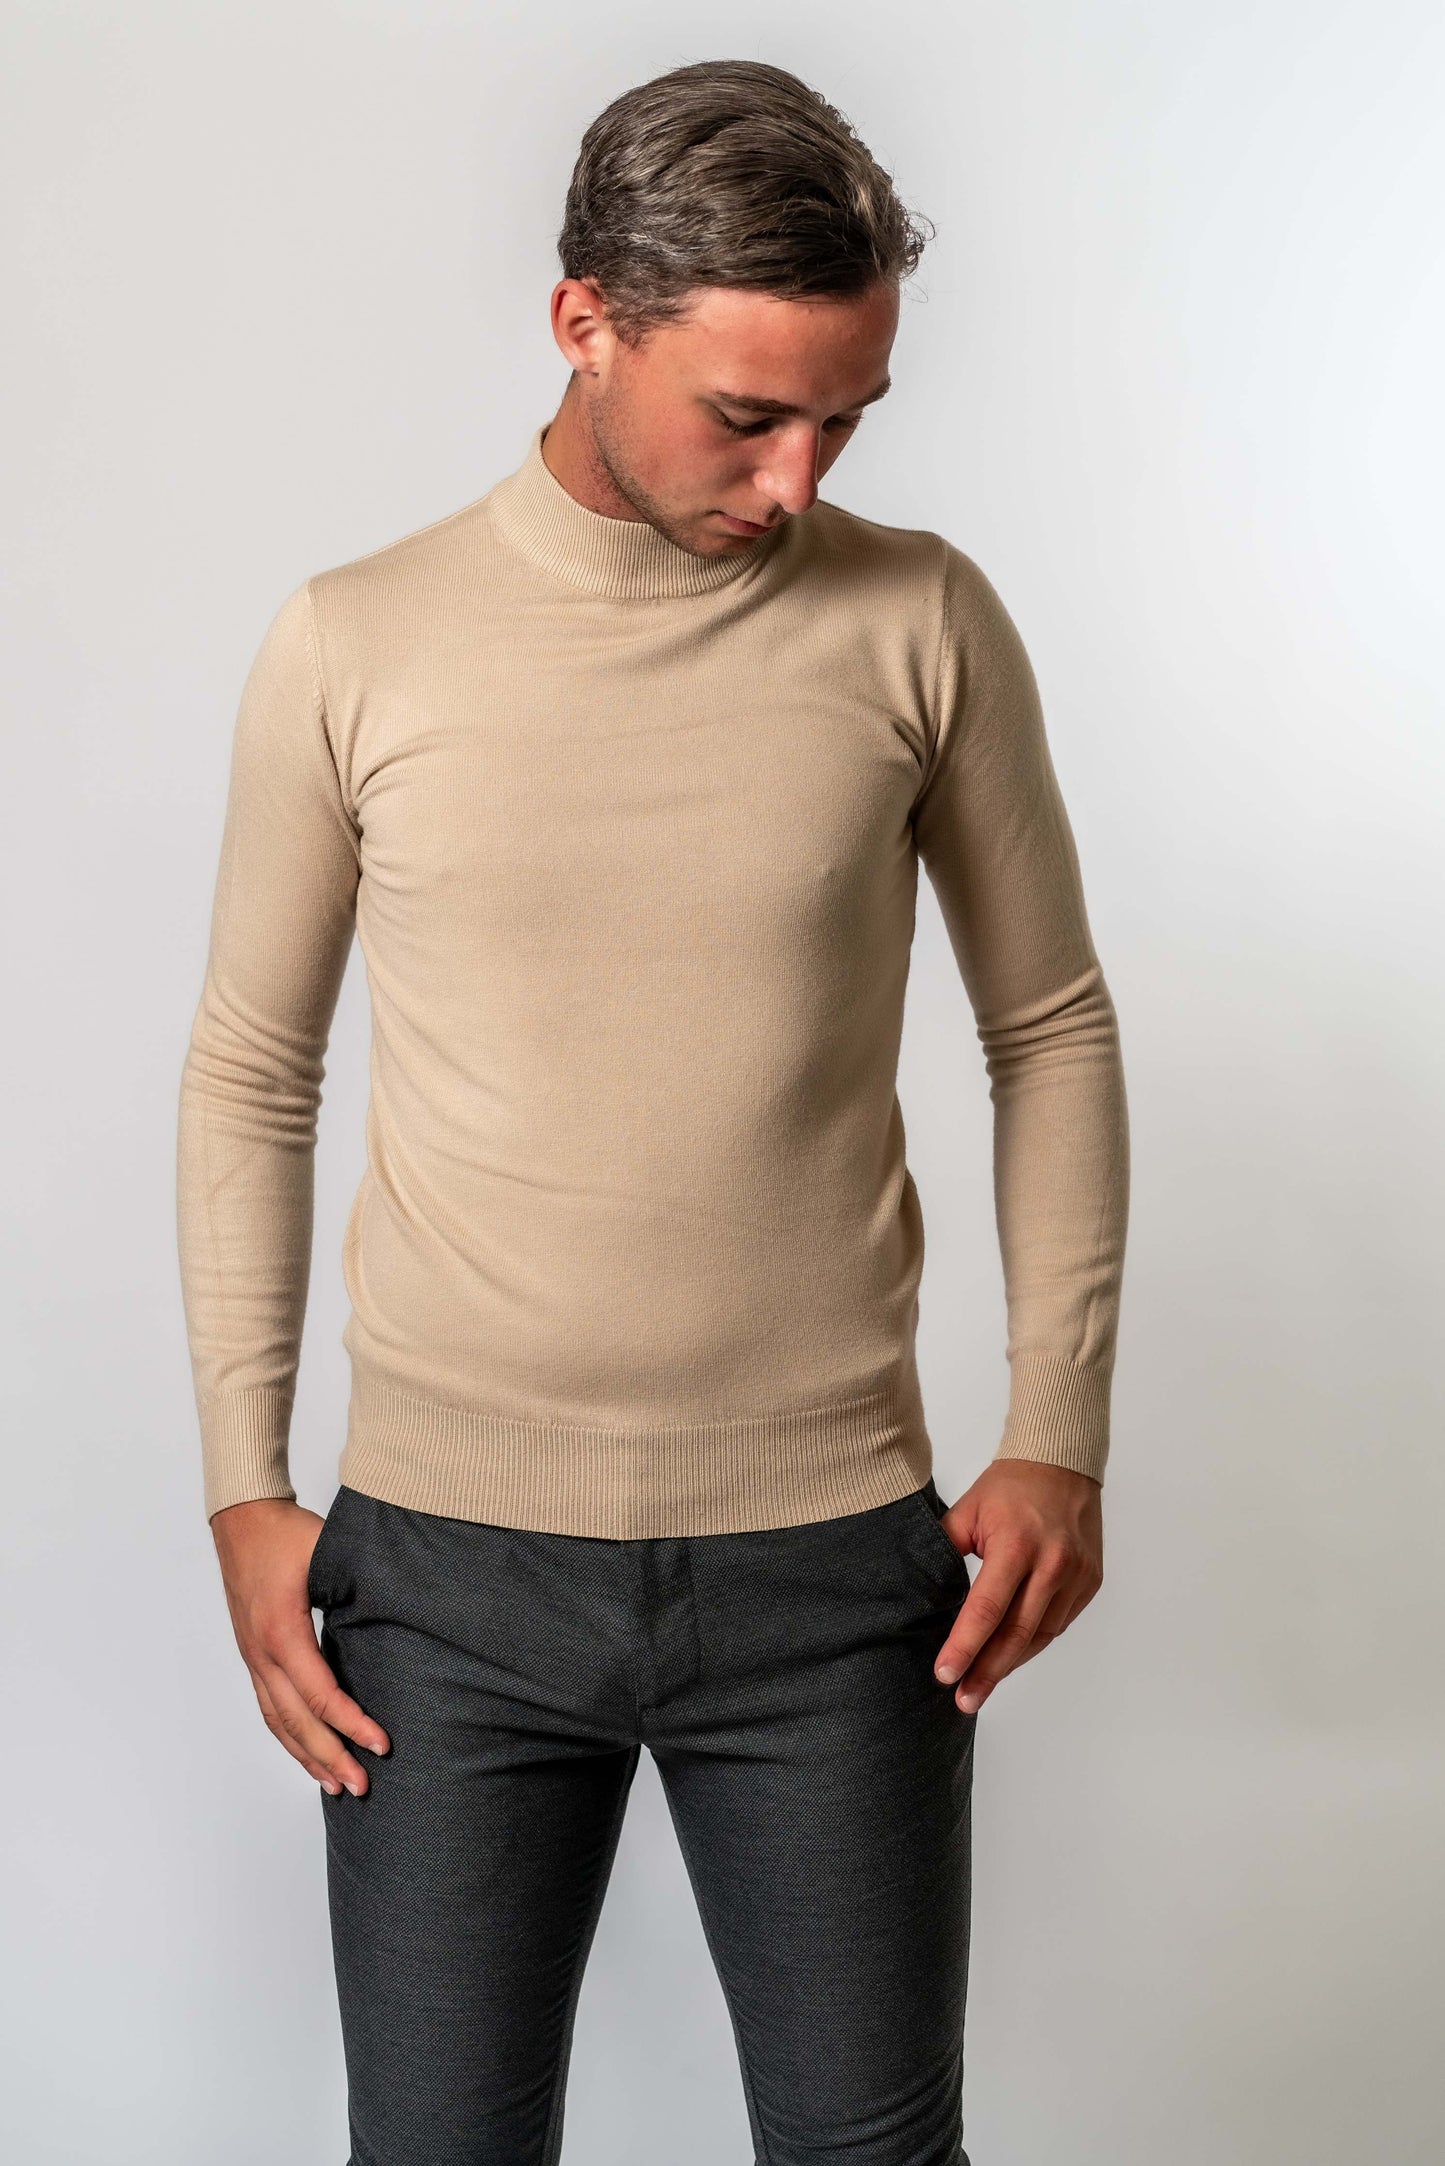 Stand-up collar sweater in beige